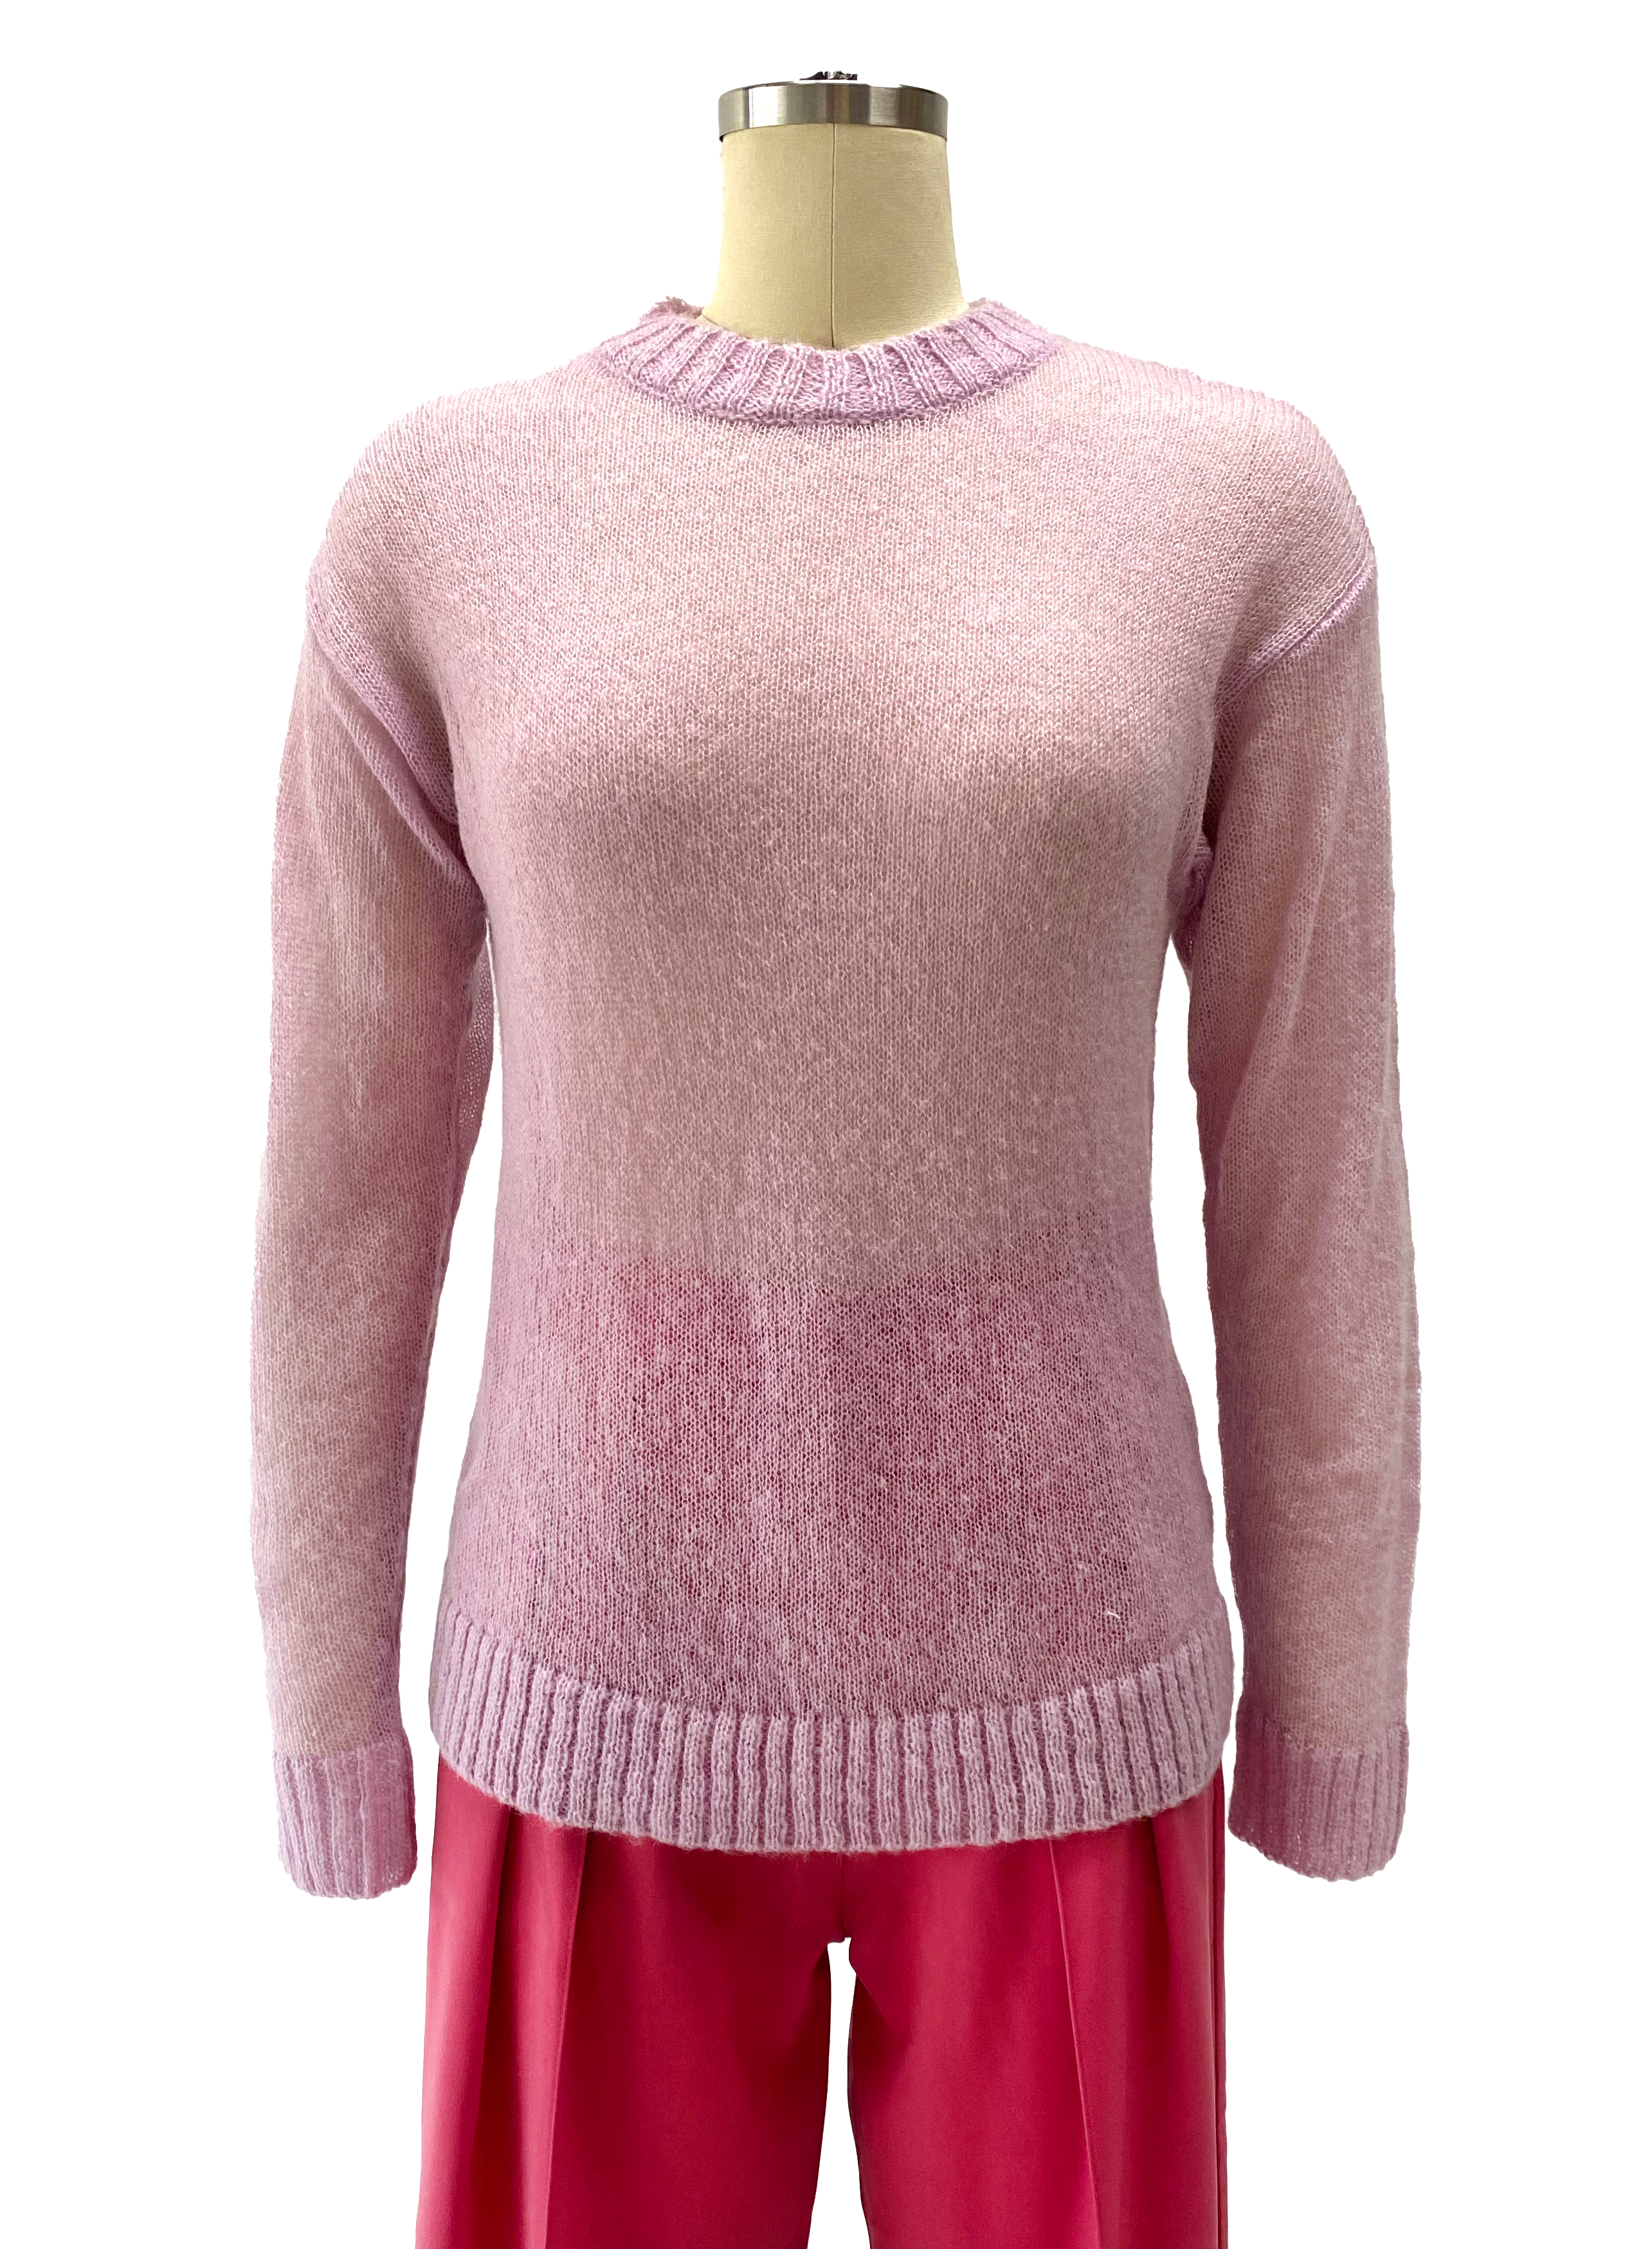 Nuzzle Clothing Shirts & Tops Lavender Alpaca Sweater